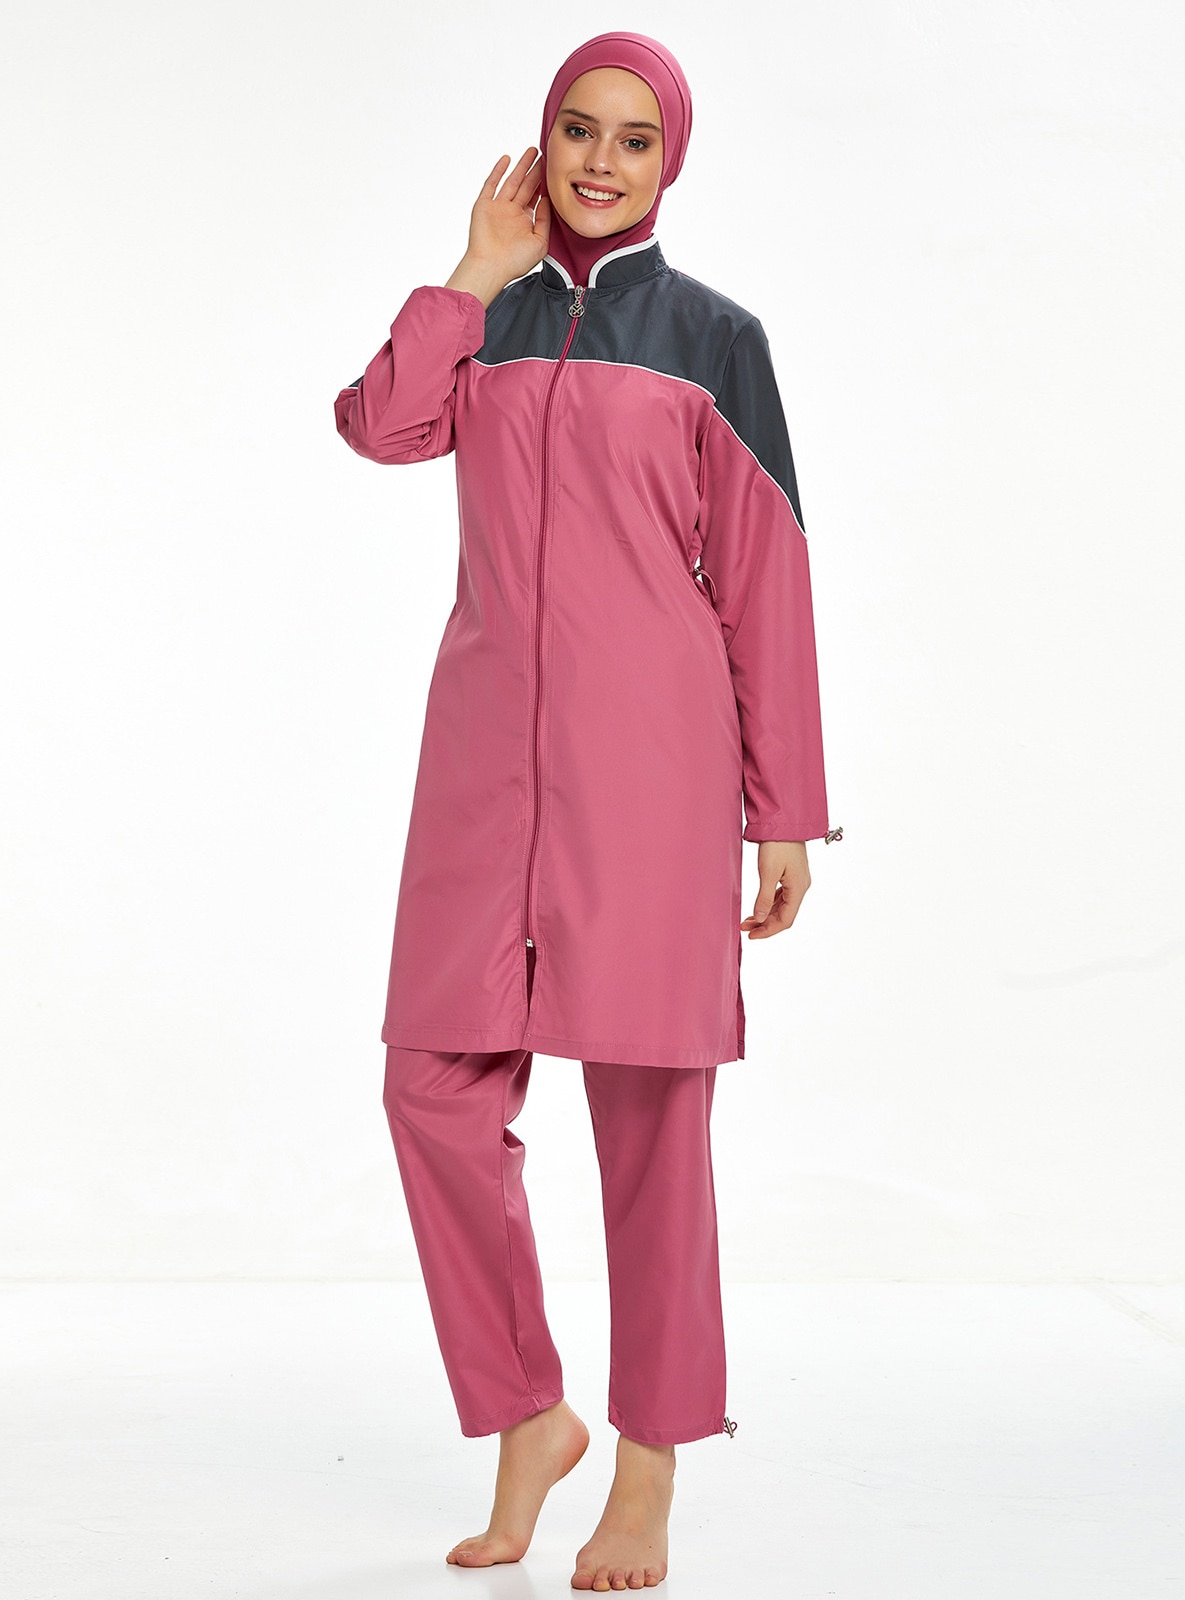 Fully Lined - Full Coverage Swimsuit Burkini